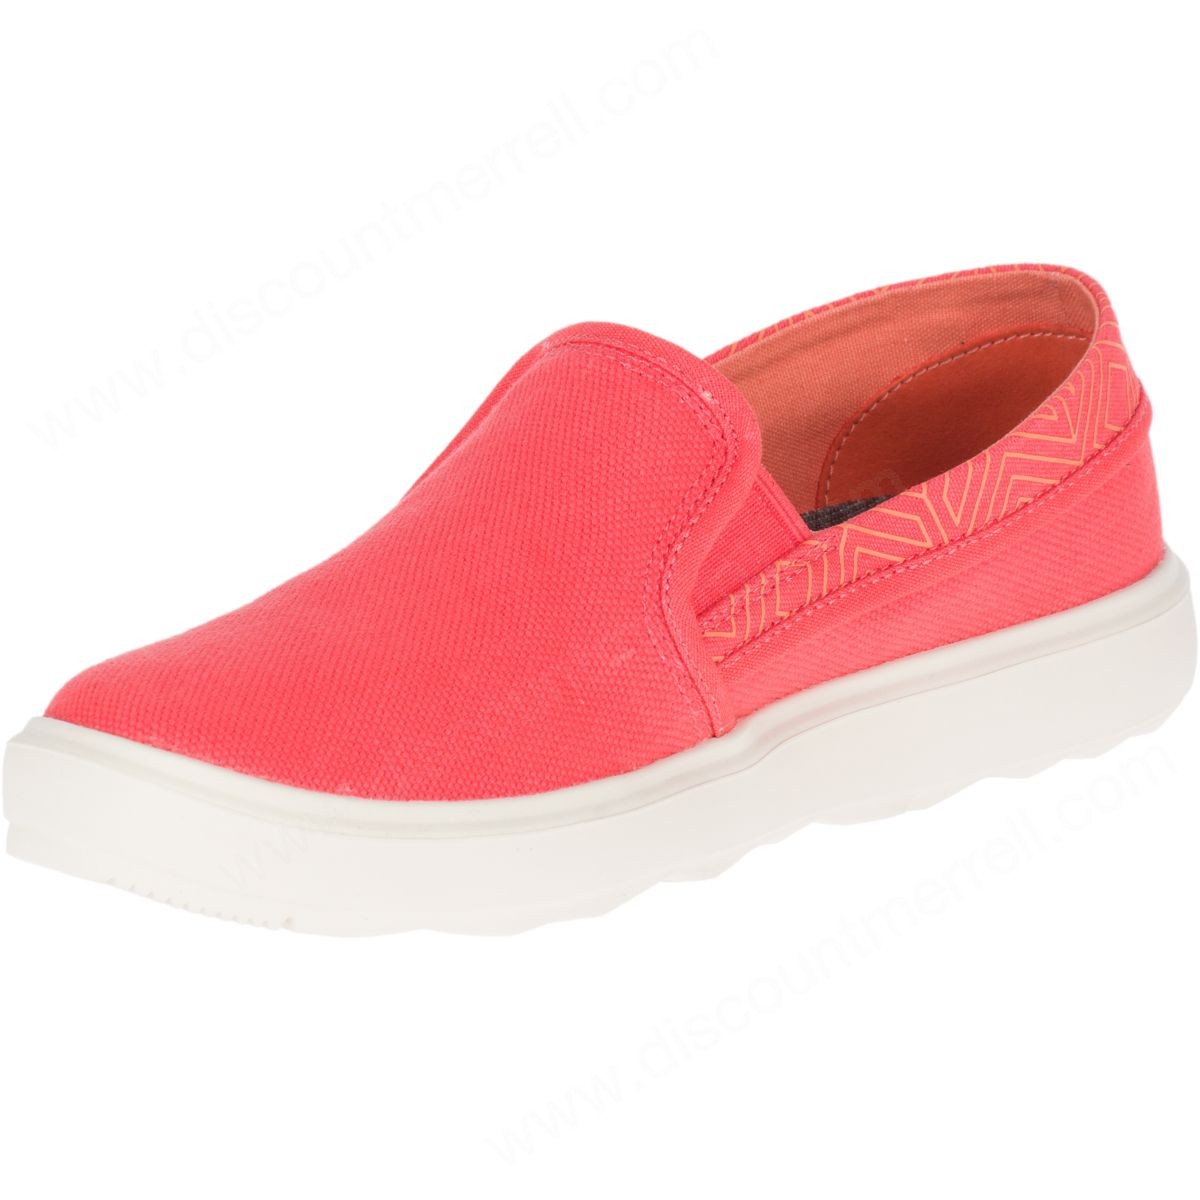 Merrell Woman's Around Town City Moc Canvas Hot Coral - -5